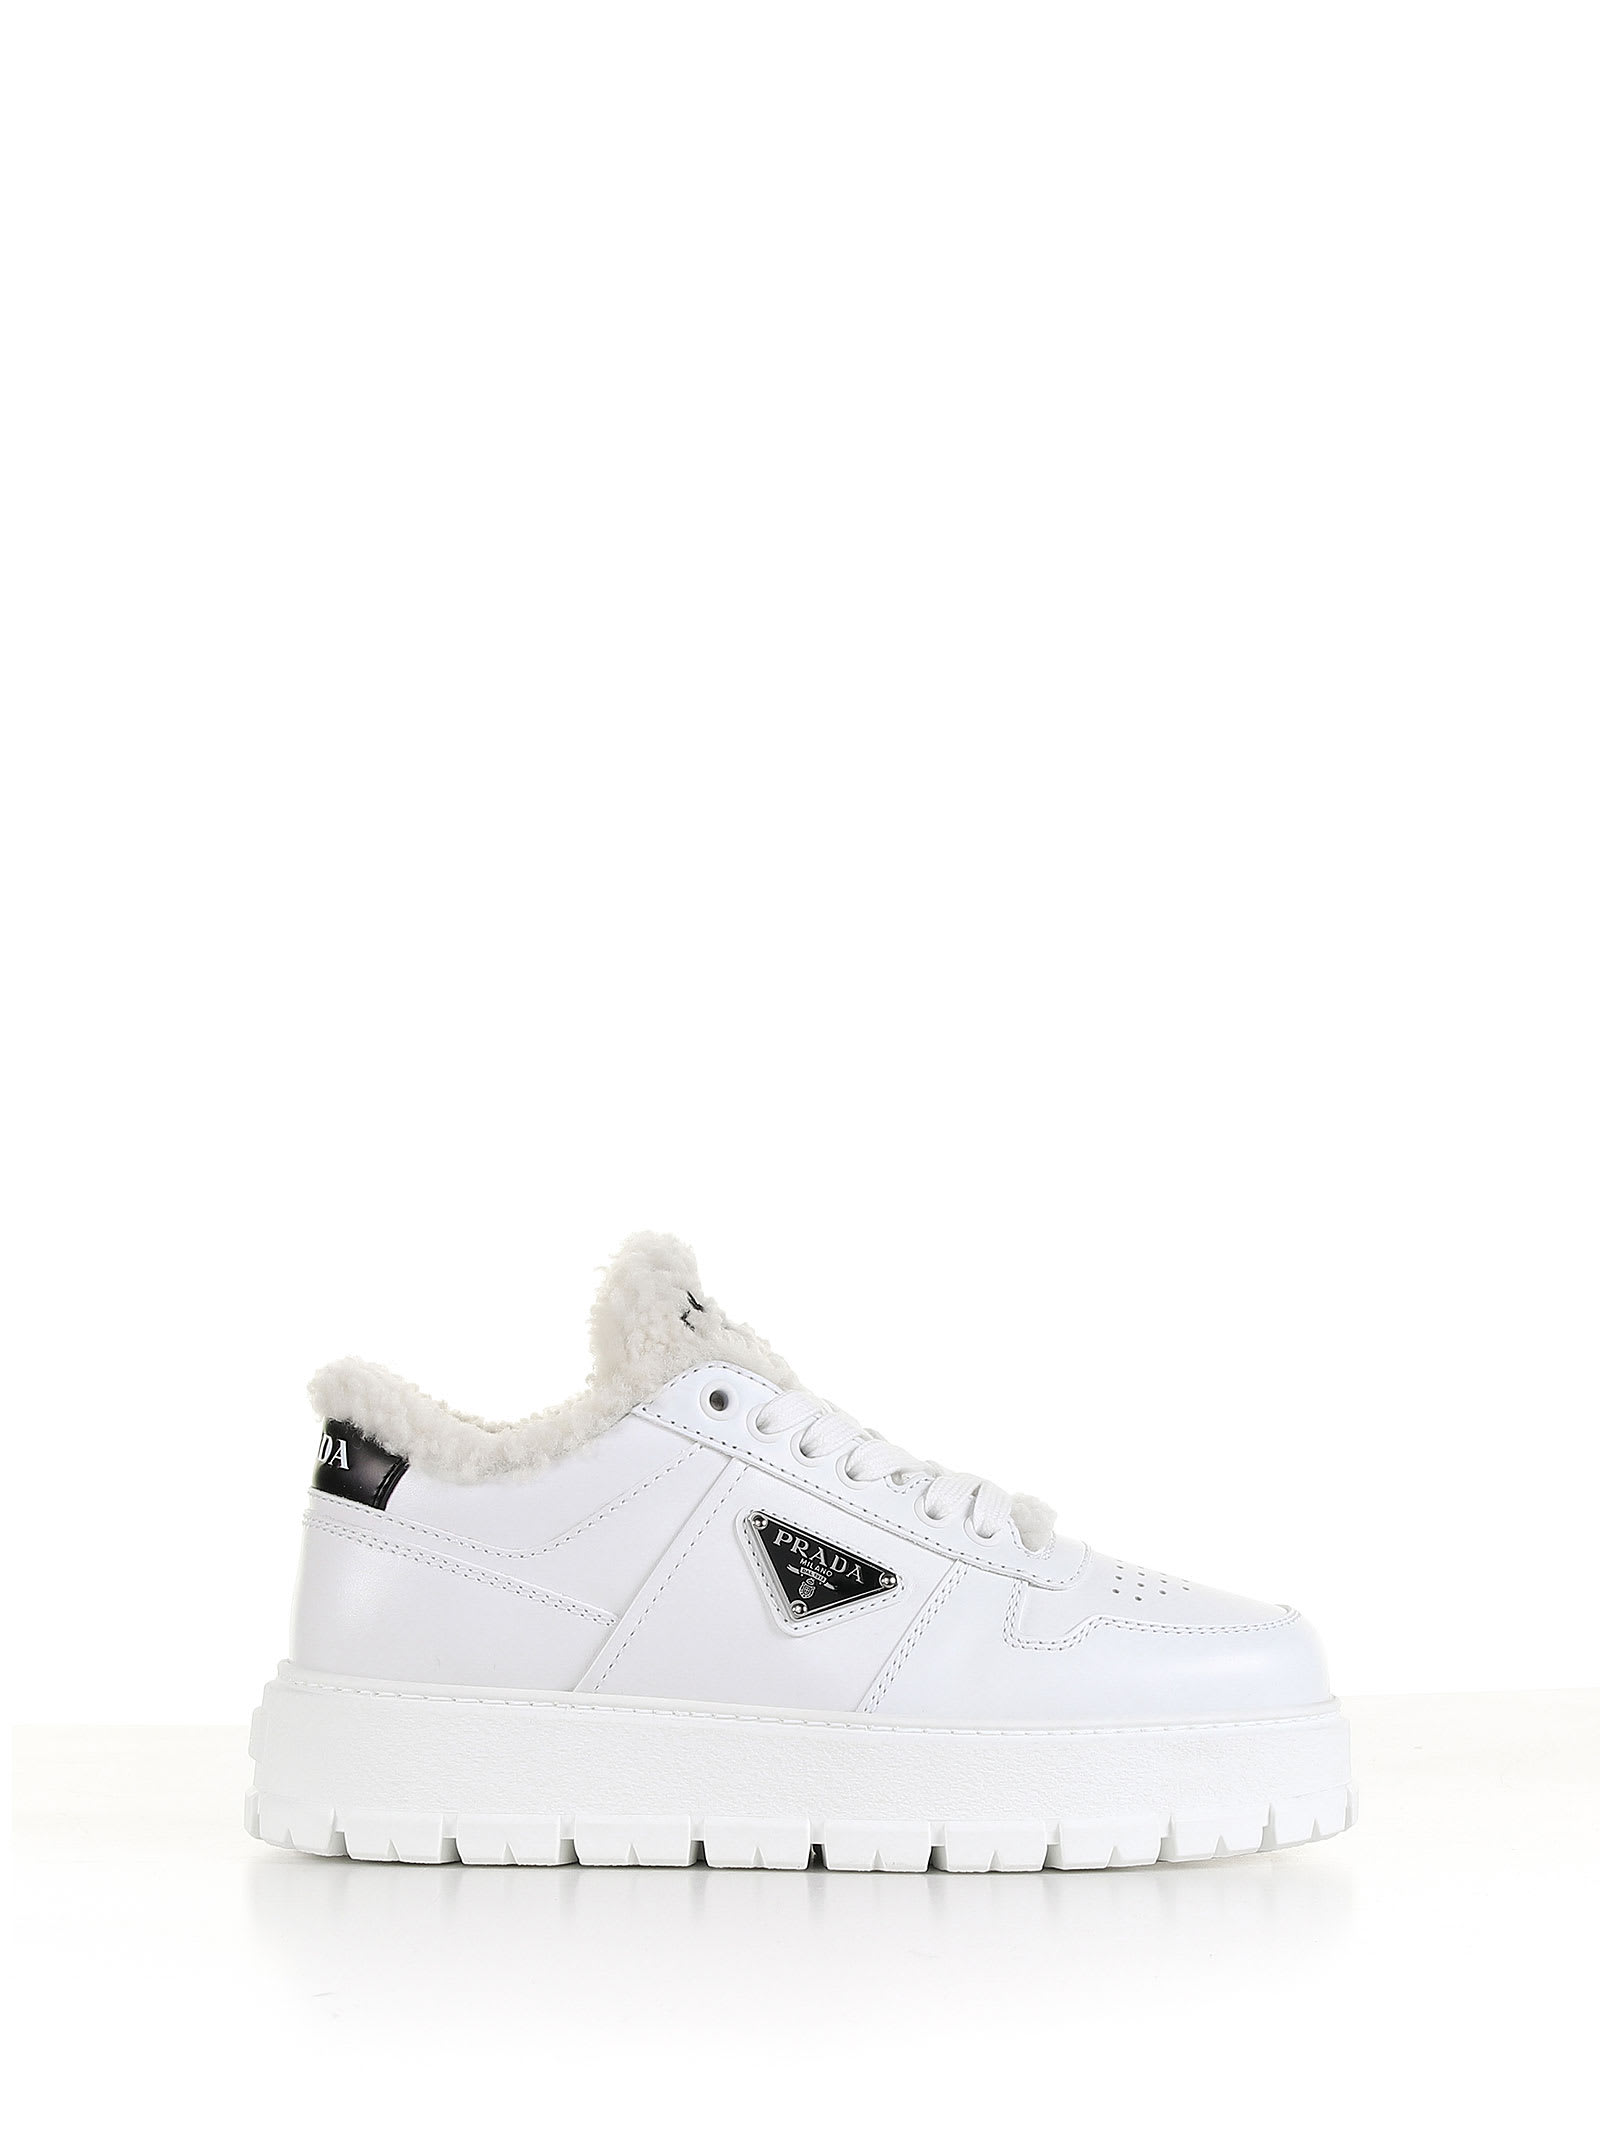 Prada Leather Sneakers With High Sole